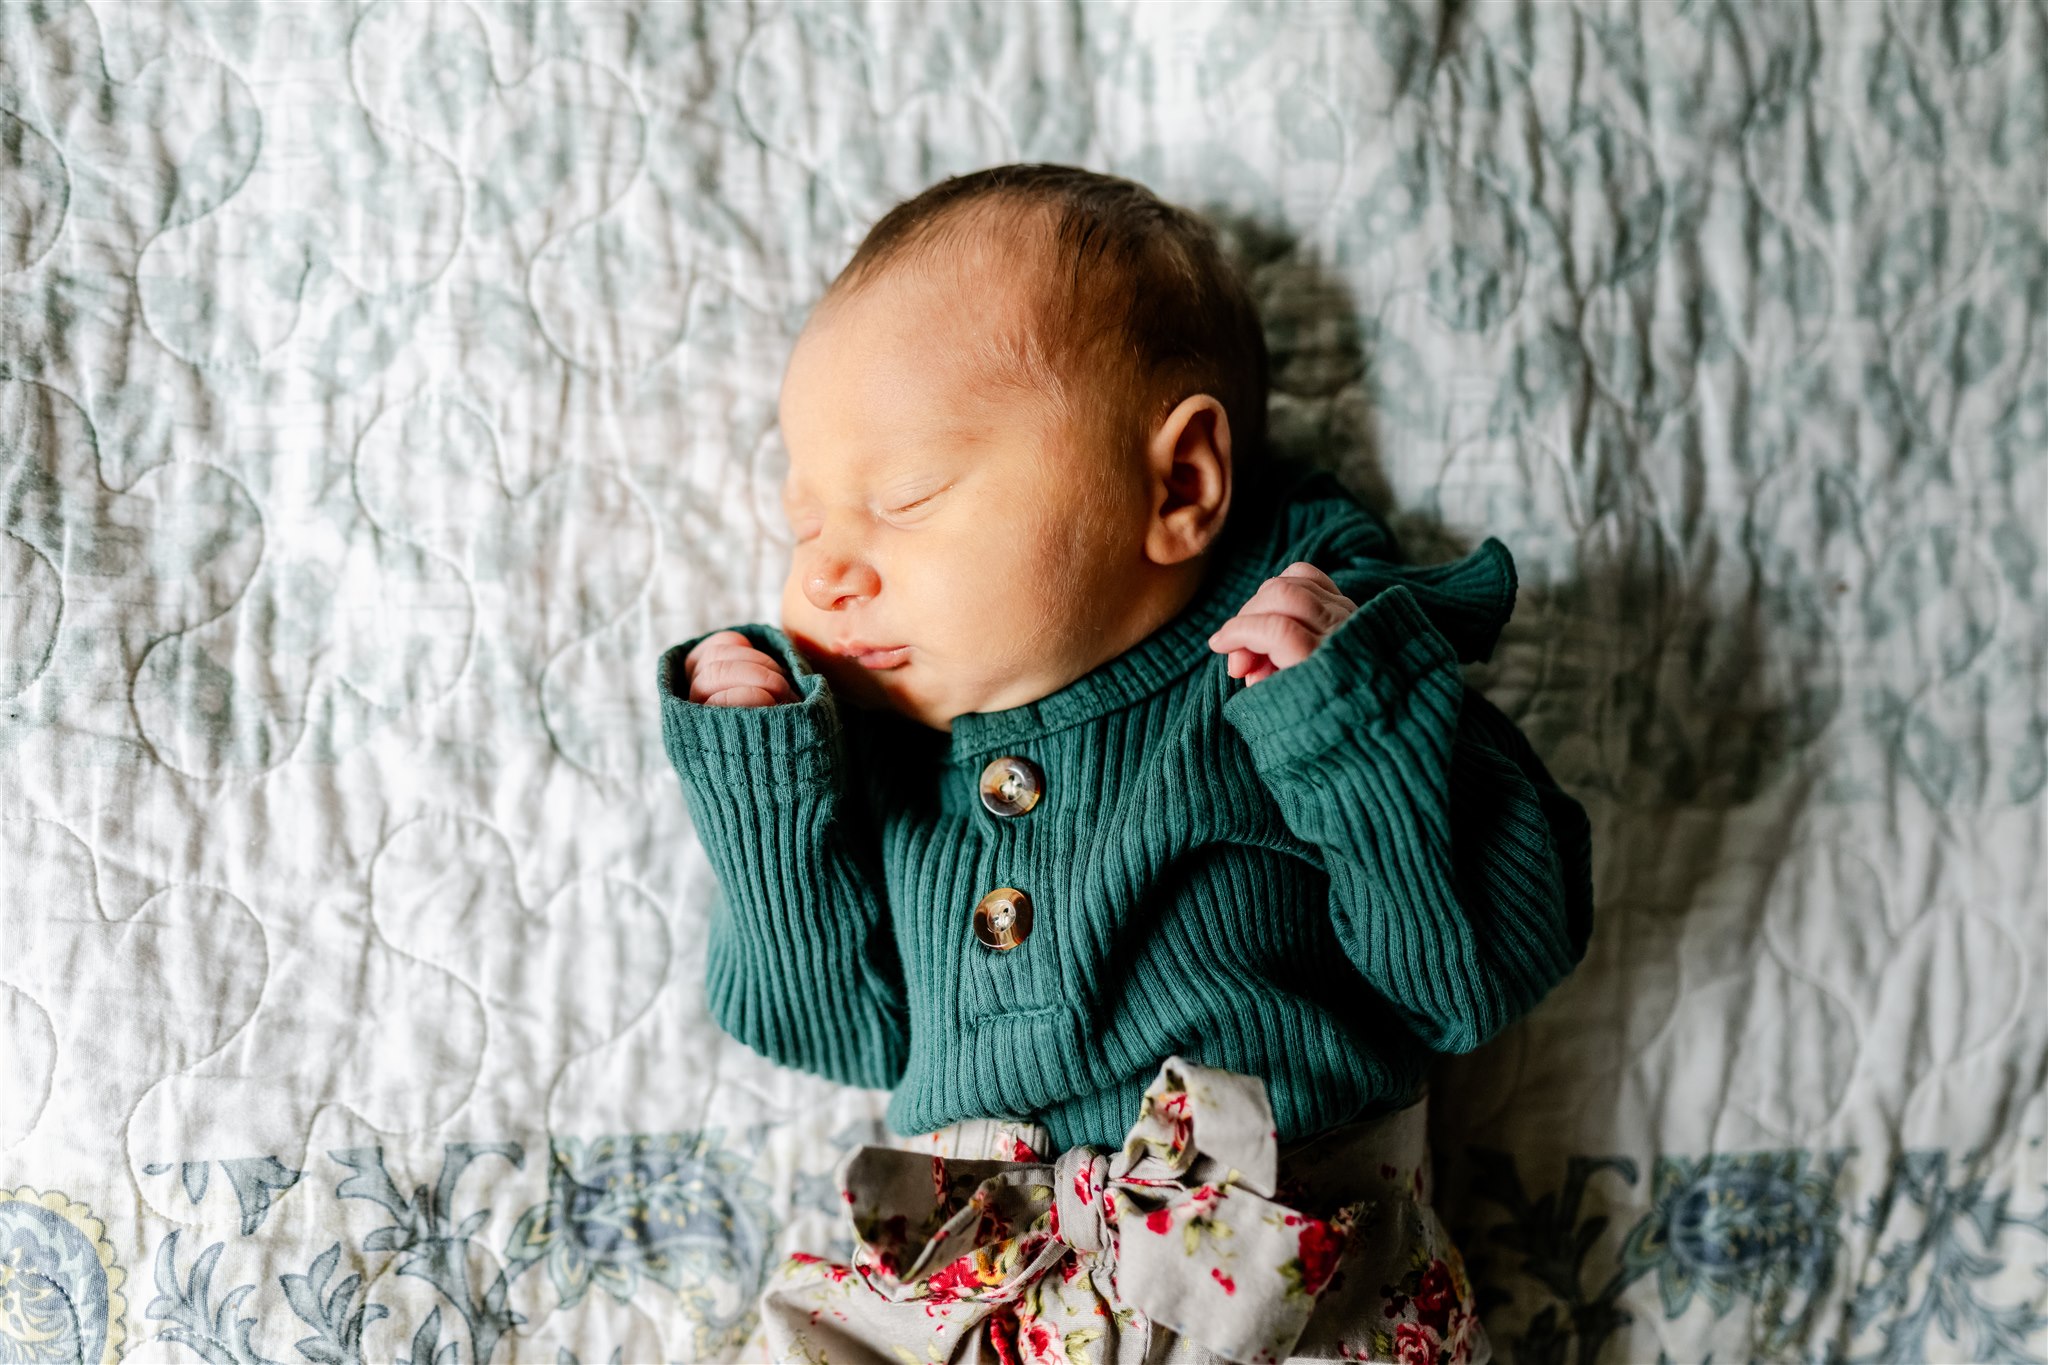 A newborn baby sleeps in a teal sweater on a bed thanks to Home Daycare Chicago